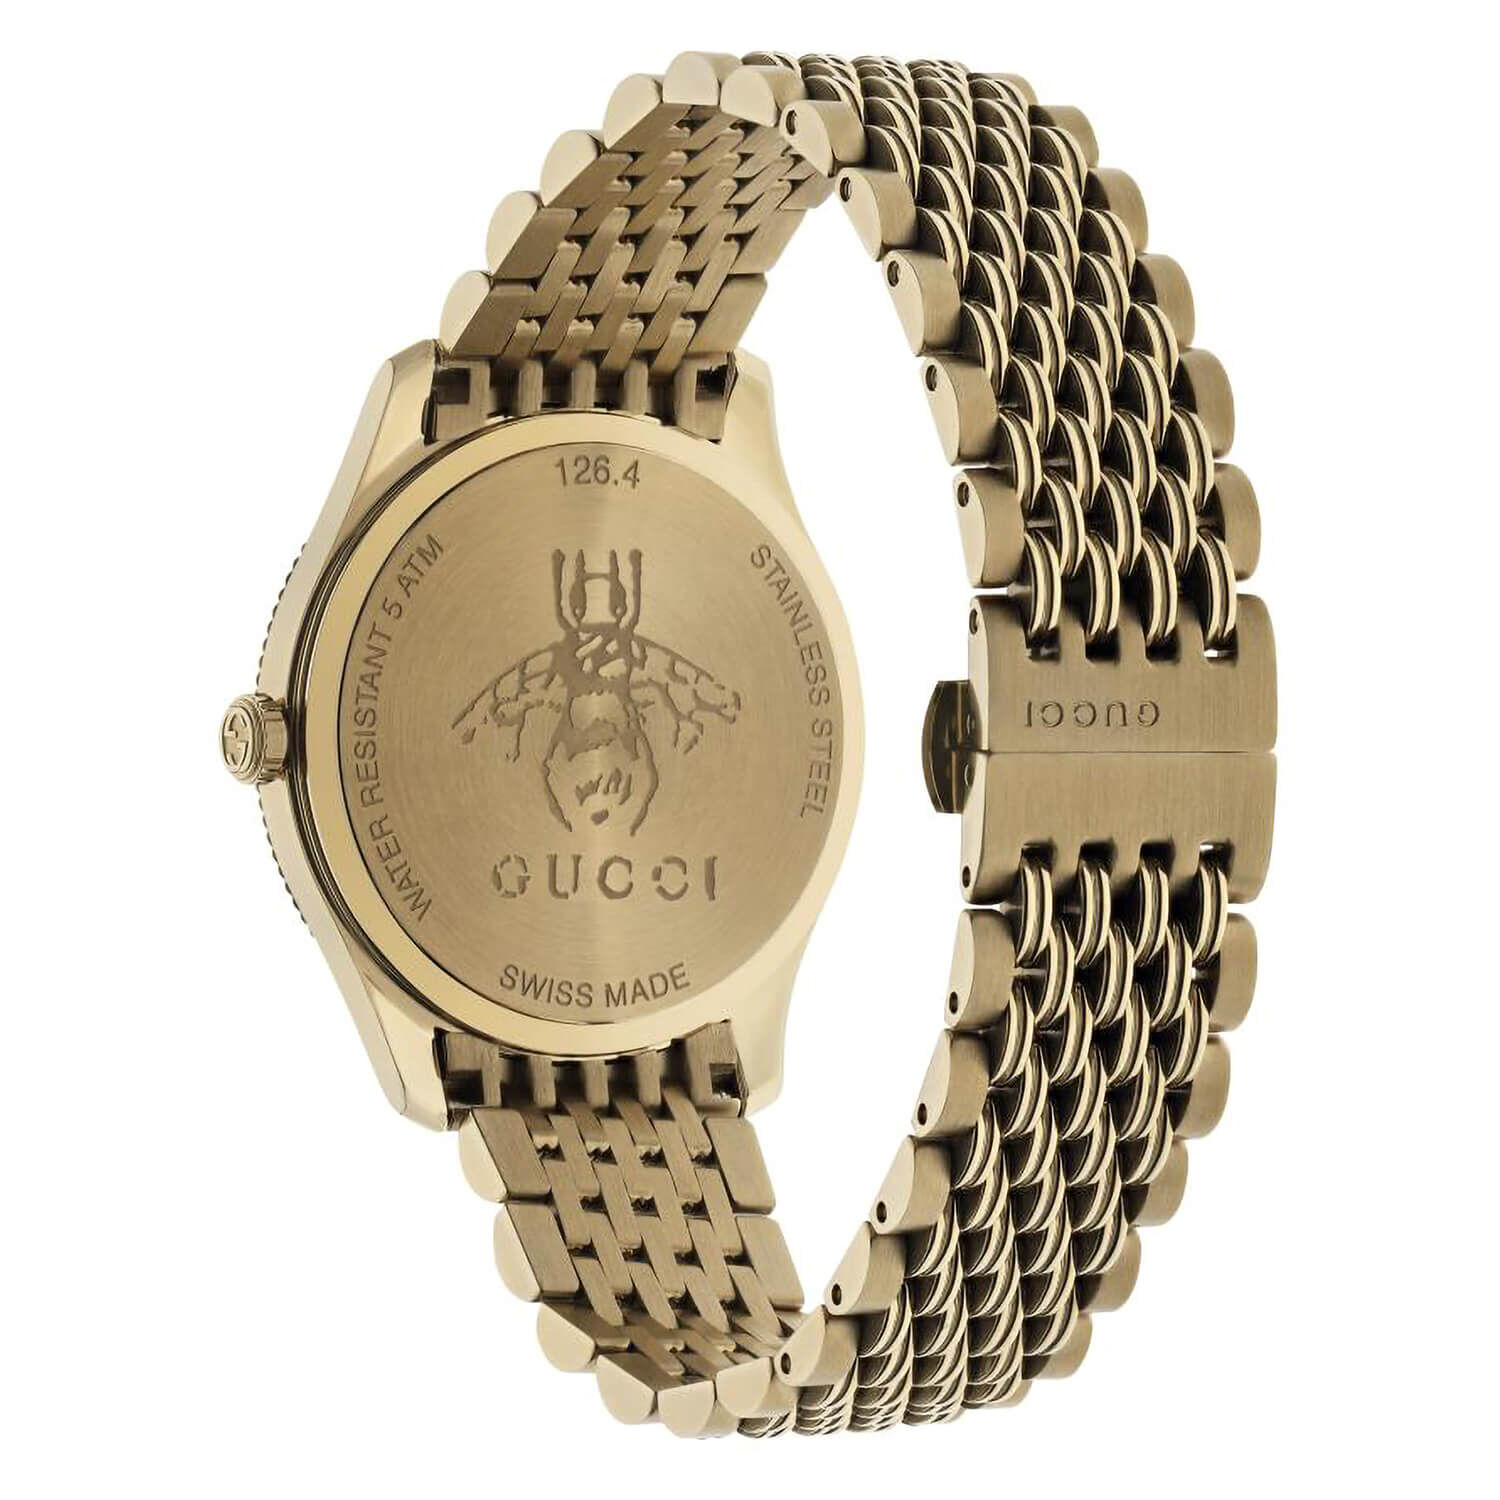 Vintage Gold Gucci Watch with Rectangular Face – Tarin Thomas